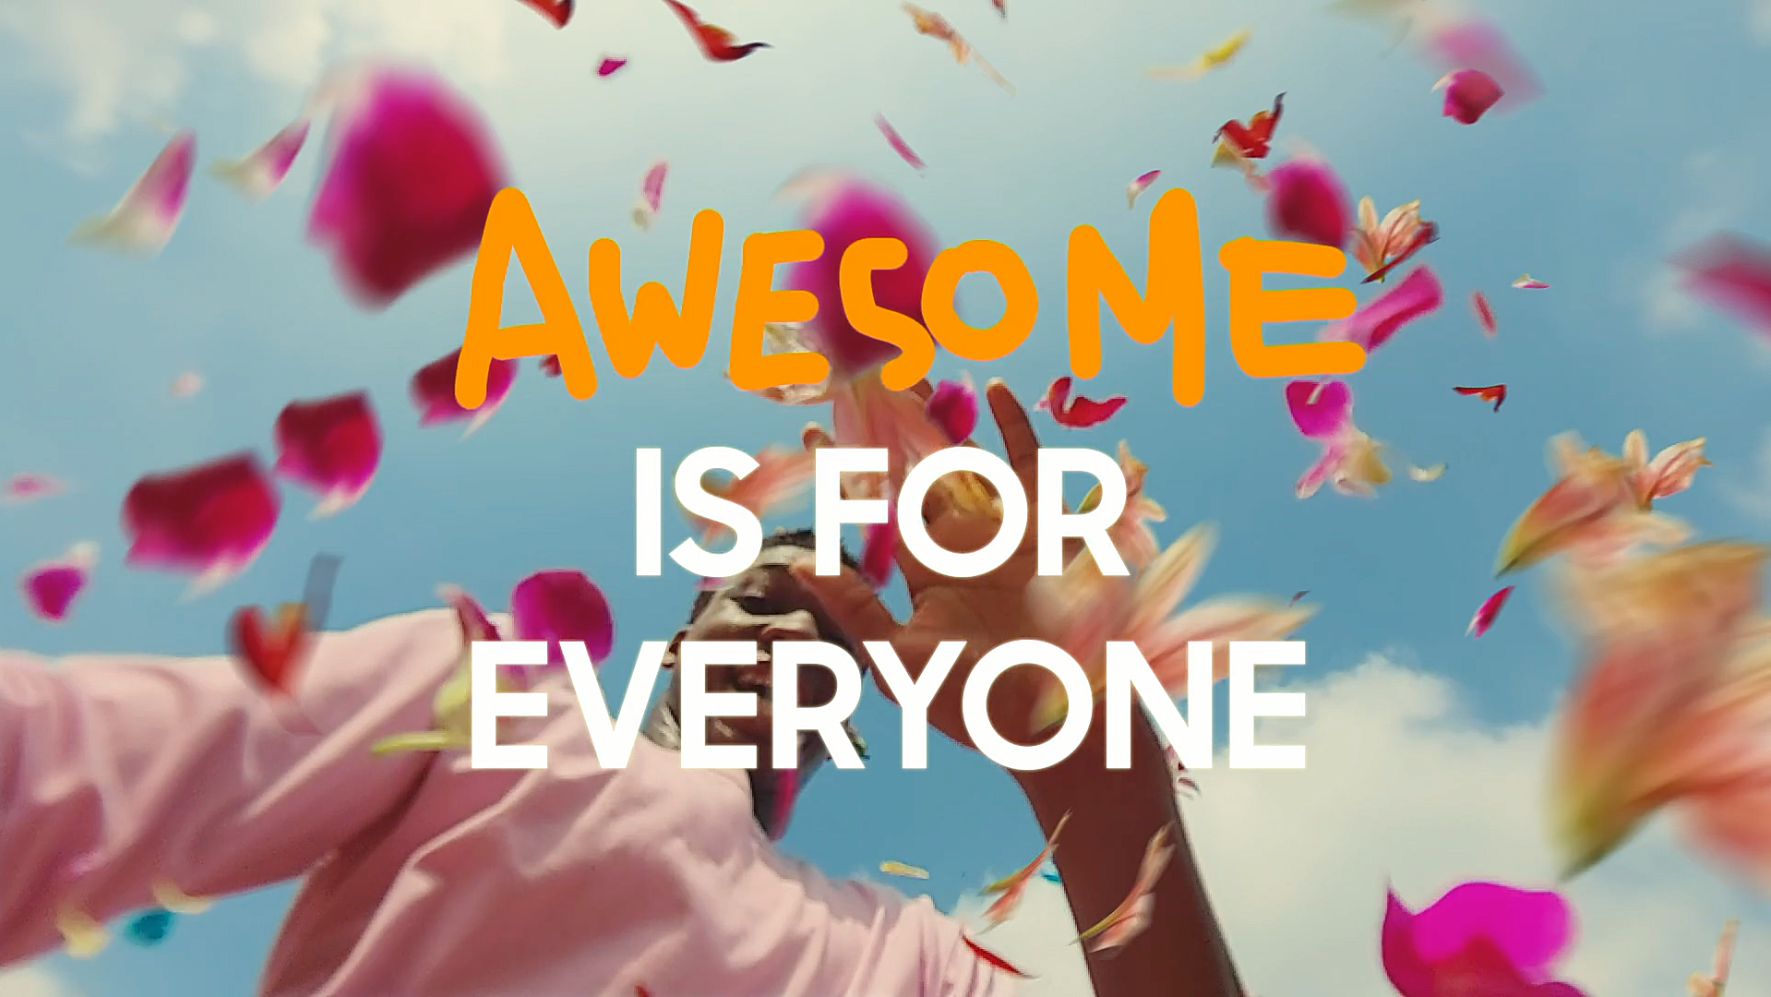 Galaxy A is officially Awesome:  AWESOME campaign celebrated by the Creative Industry